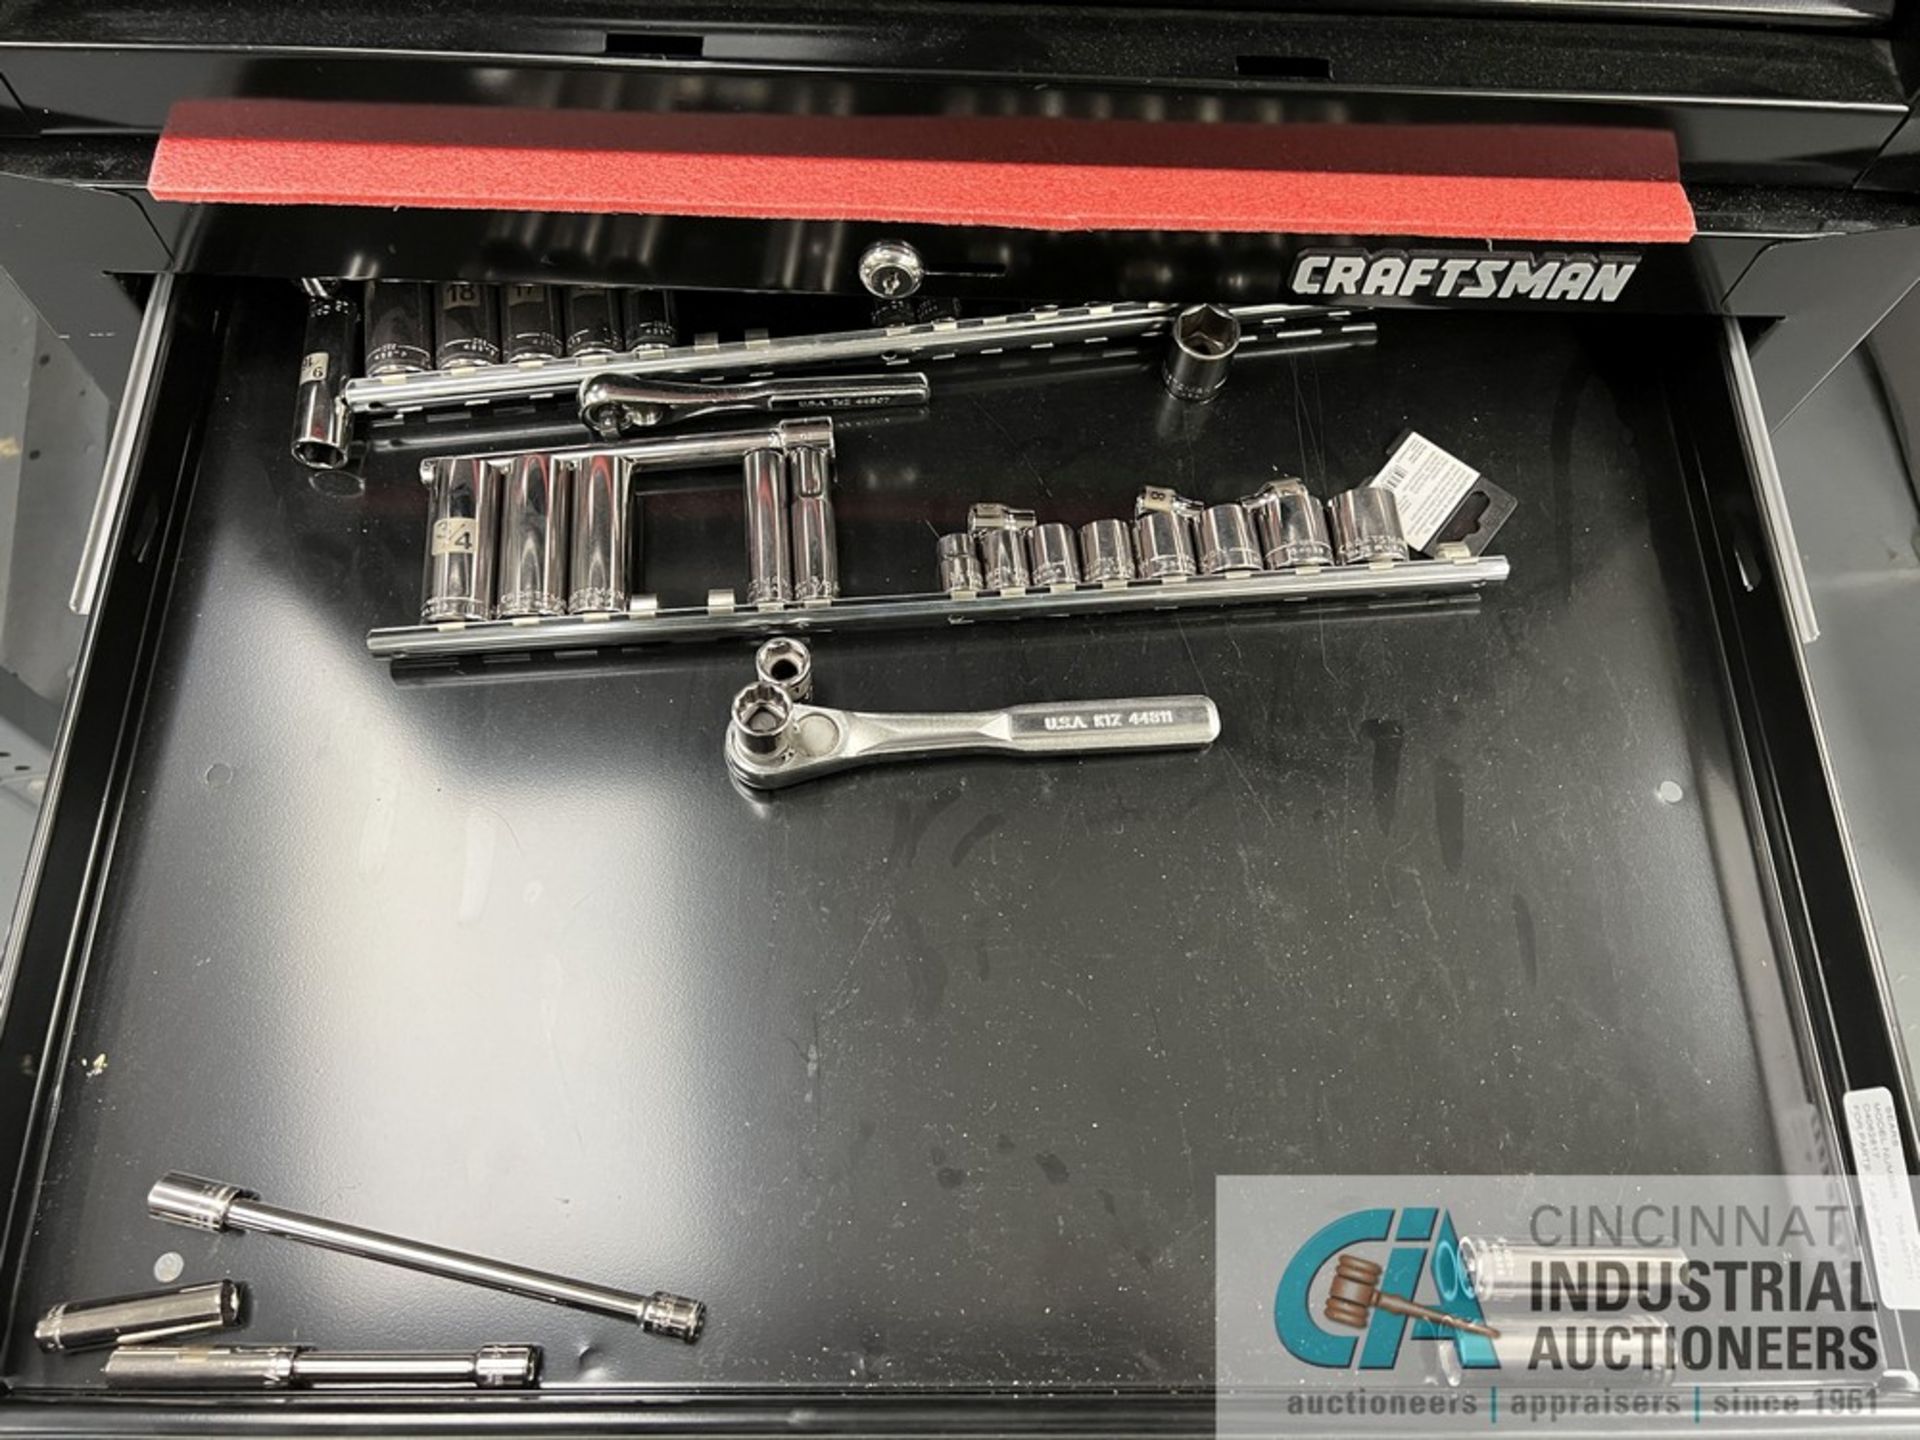 11-DRAWER CRAFTSMAN PORTABLE TOOLBOX WITH TOOLS (MAIN) - Image 7 of 9